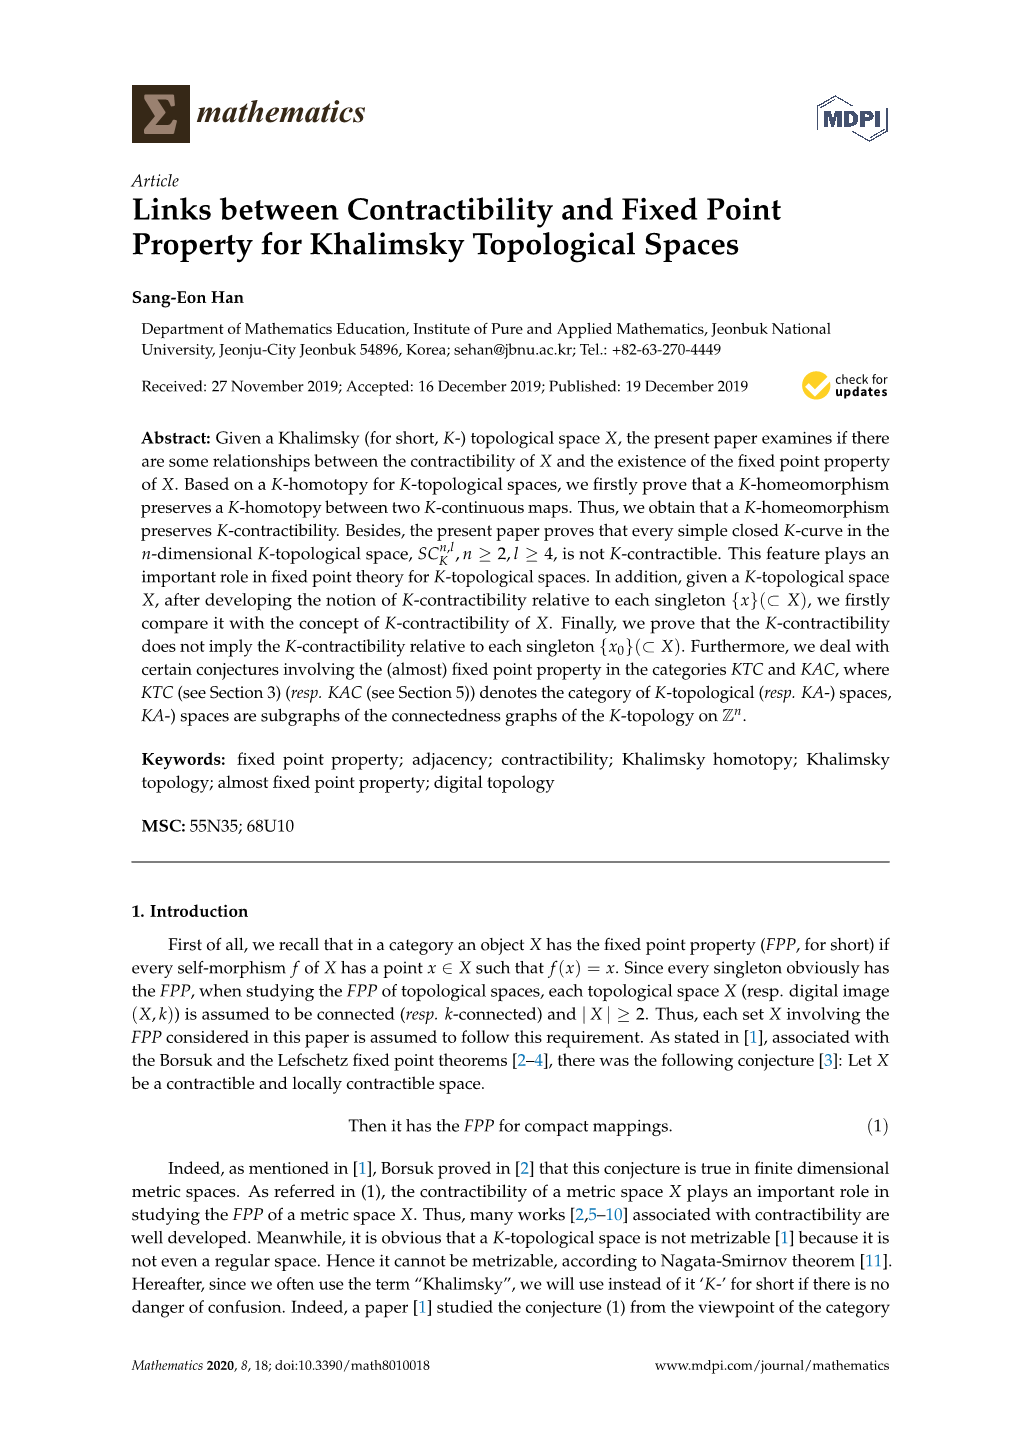 Links Between Contractibility and Fixed Point Property for Khalimsky Topological Spaces